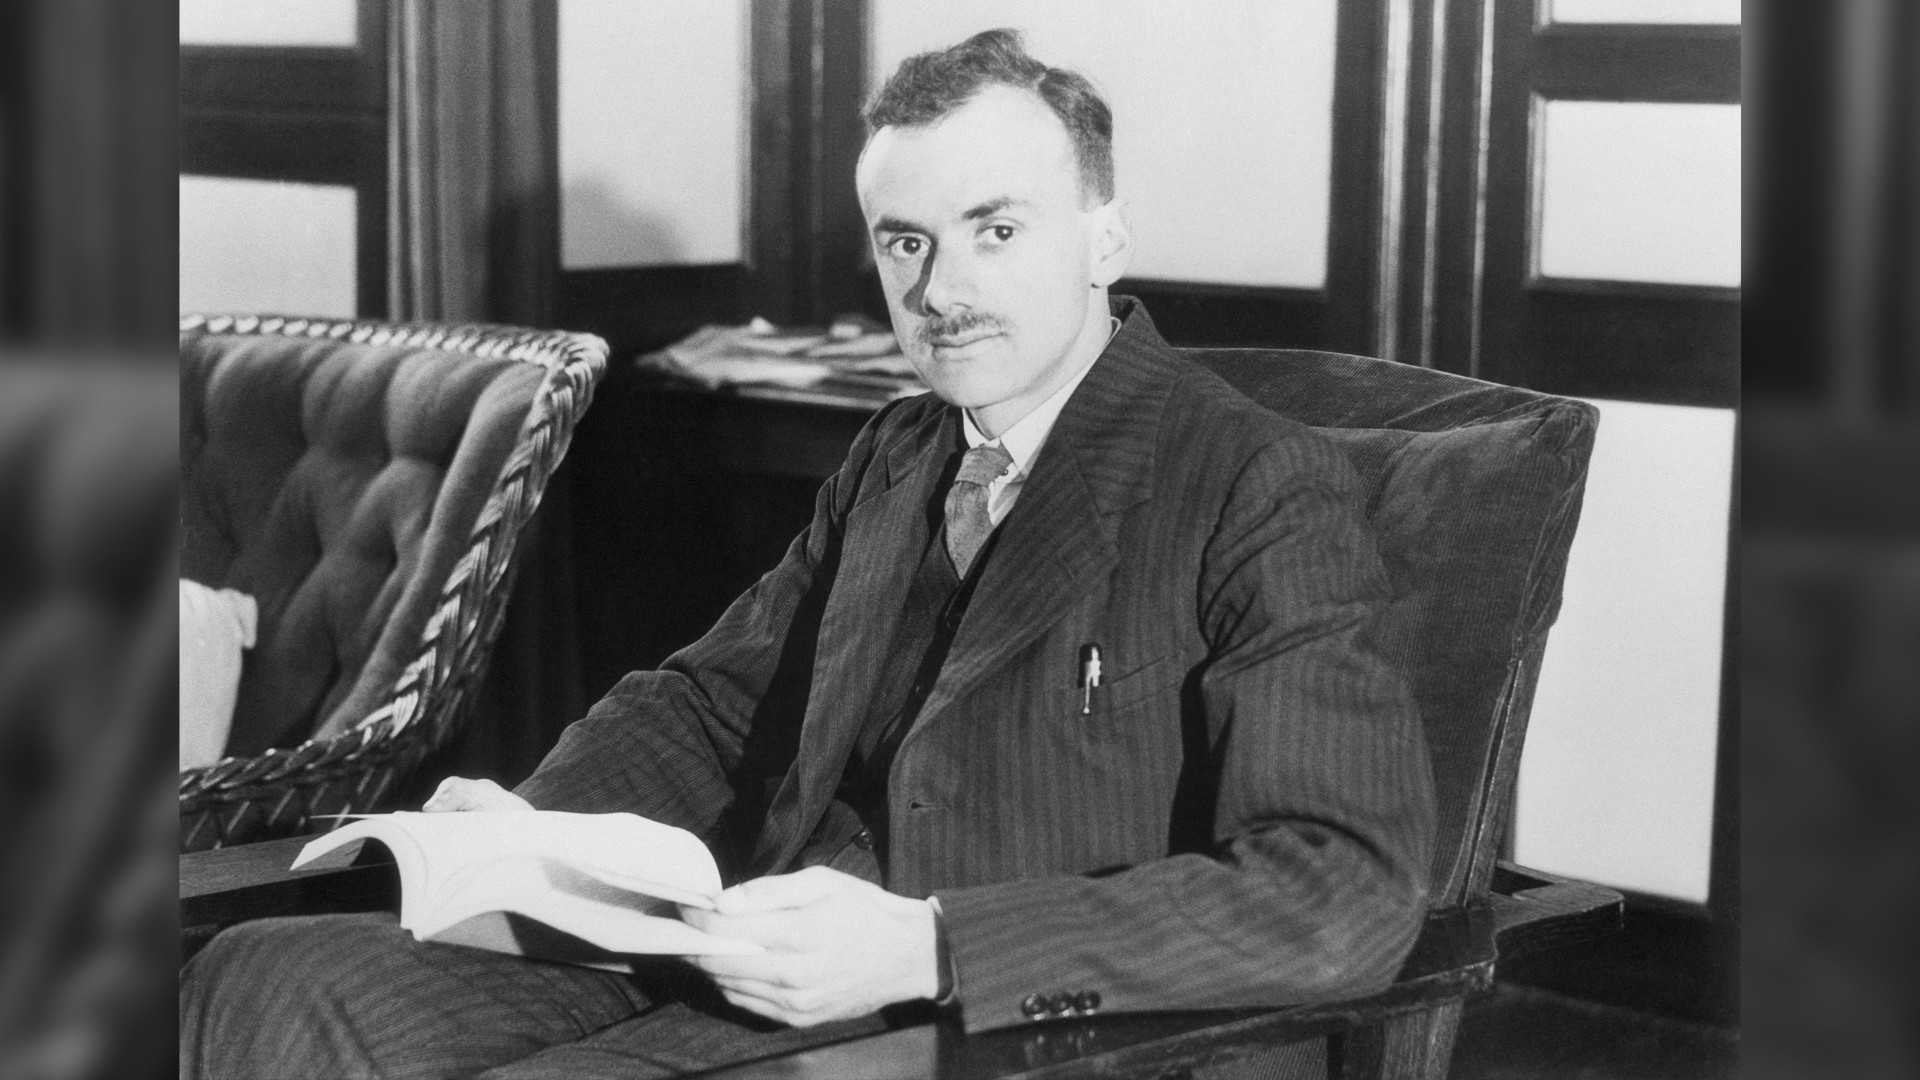 A black and white photograph of Paul Adrien Maurice Dirac. He has short dark hair, a moustache and is wearing a pin-striped suit. He is sitting down in a comfy chair, holding a book open in his lap.